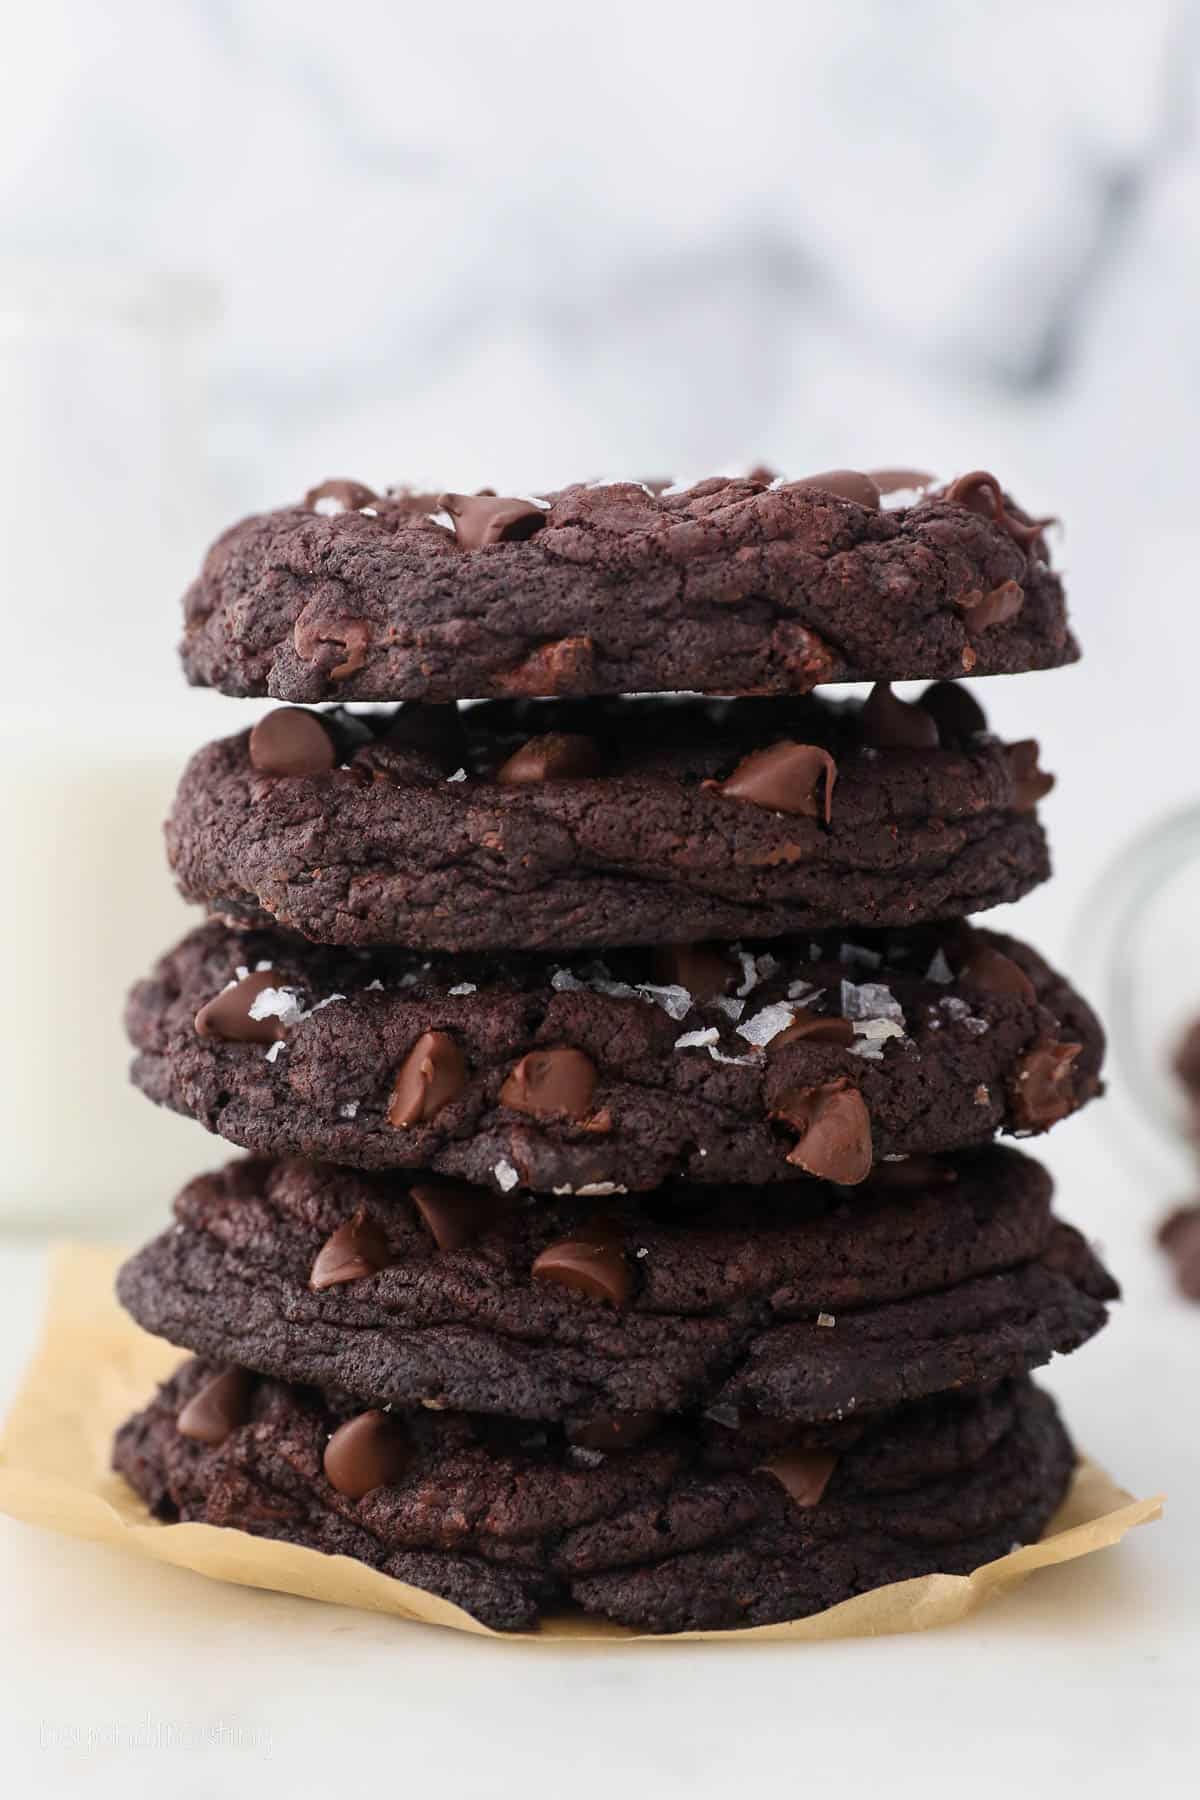 A stack of chocolate cookies on a piece of parchment paper.